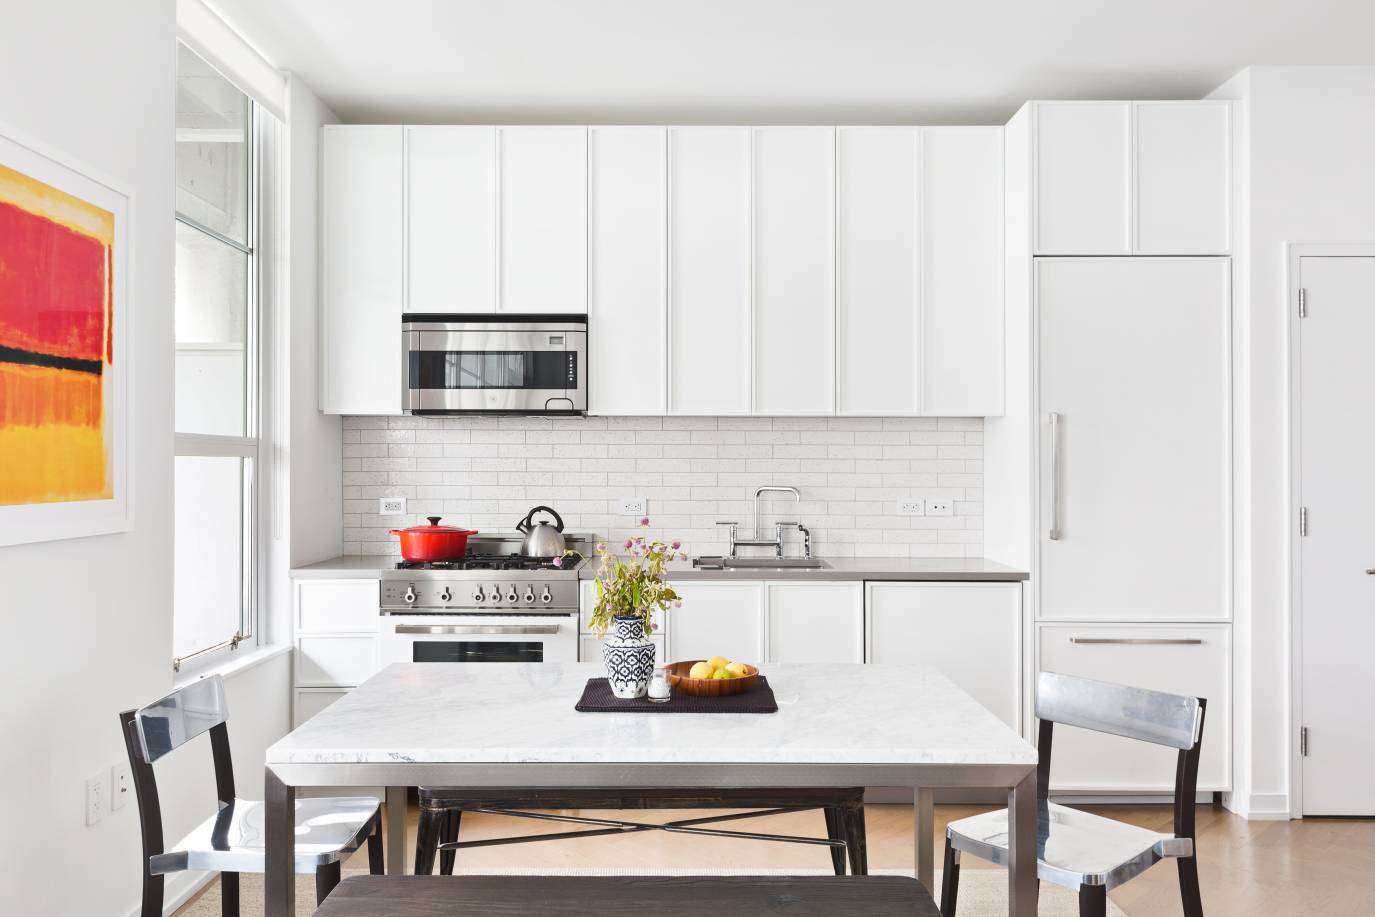 Unit A504 at 184 Kent Ave exemplifies luxury living in Prime Williamsburg.